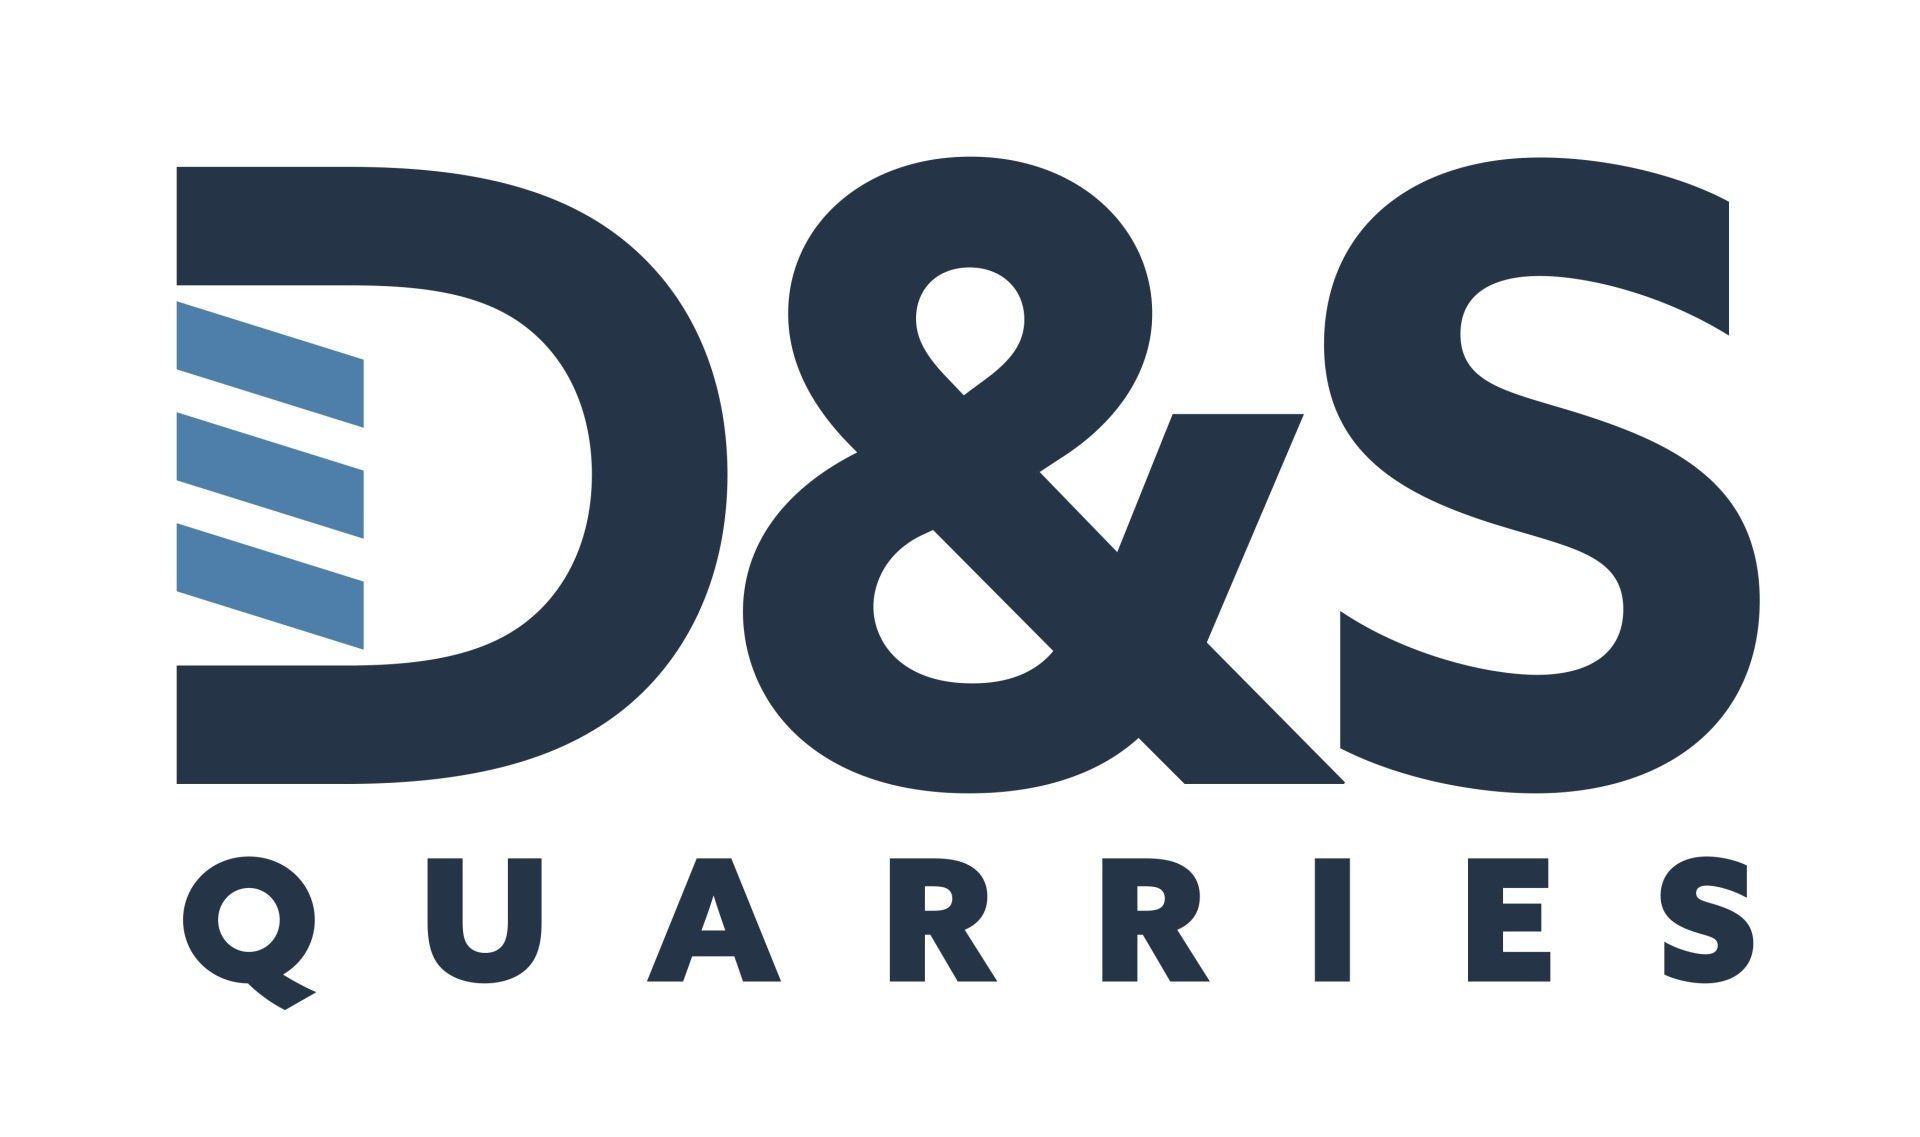 D&S Quarries: Providing Construction Supplies in the Northern Territory